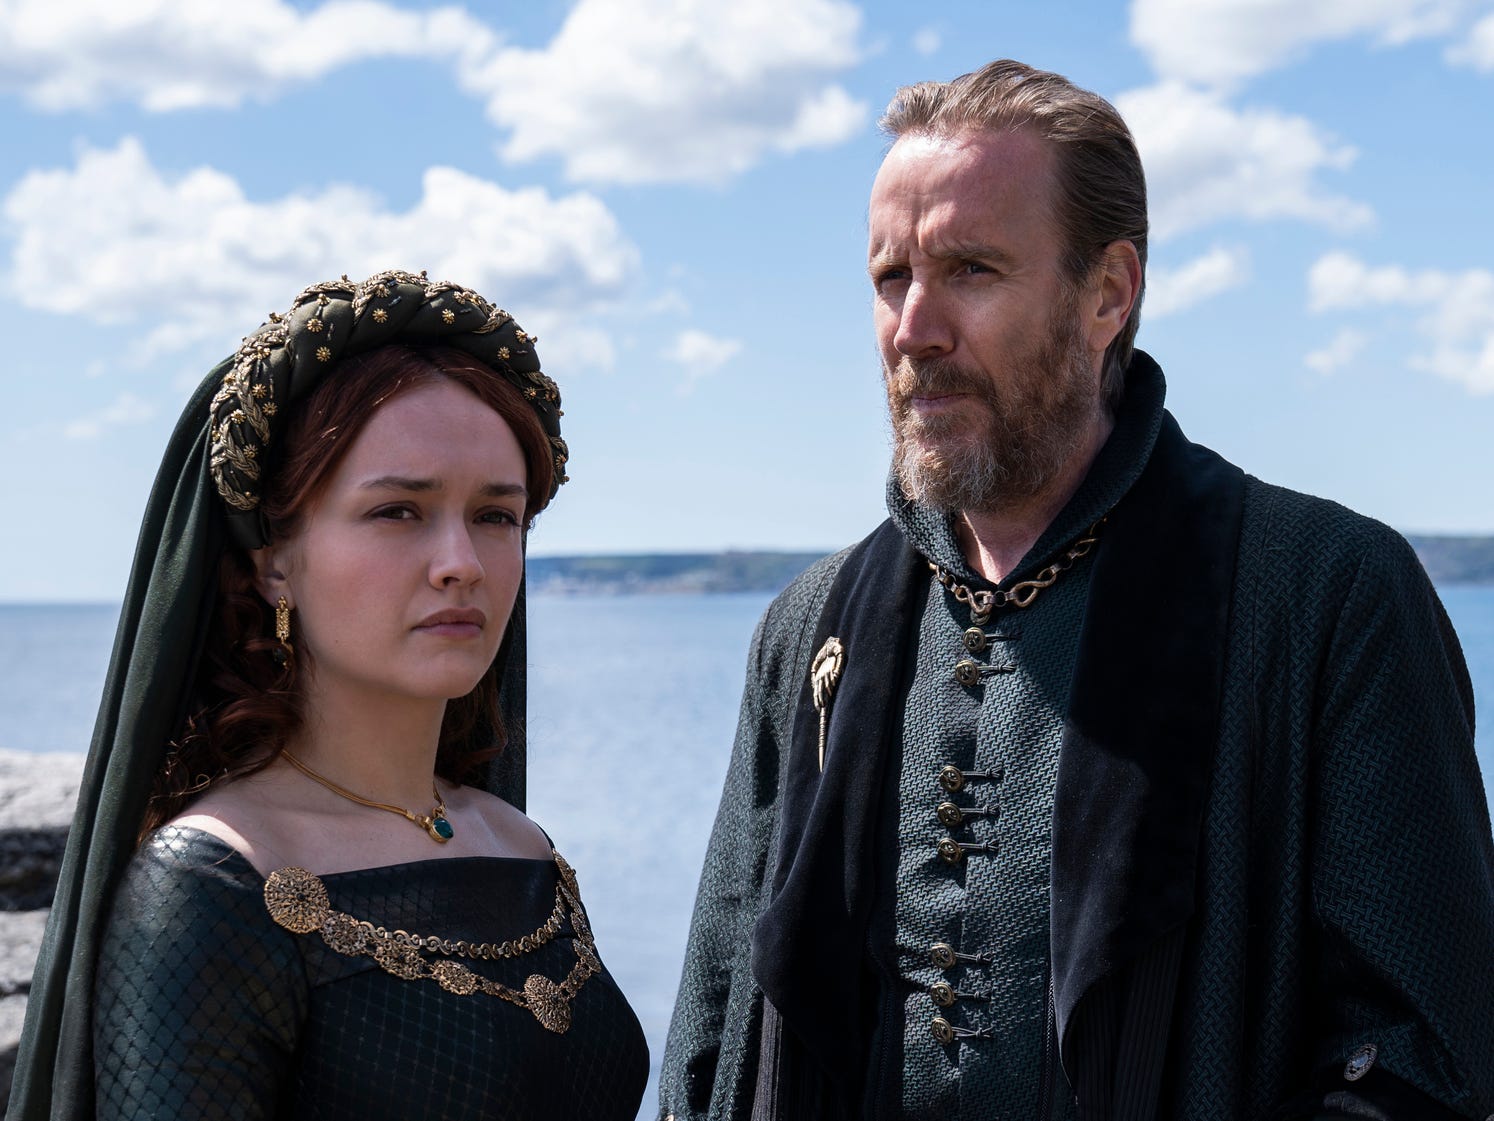 Olivia Cooke as Alicent Hightower and Rhys Ifans as Otto Hightower House of the Dragon HBO Game of Thrones TV show 2